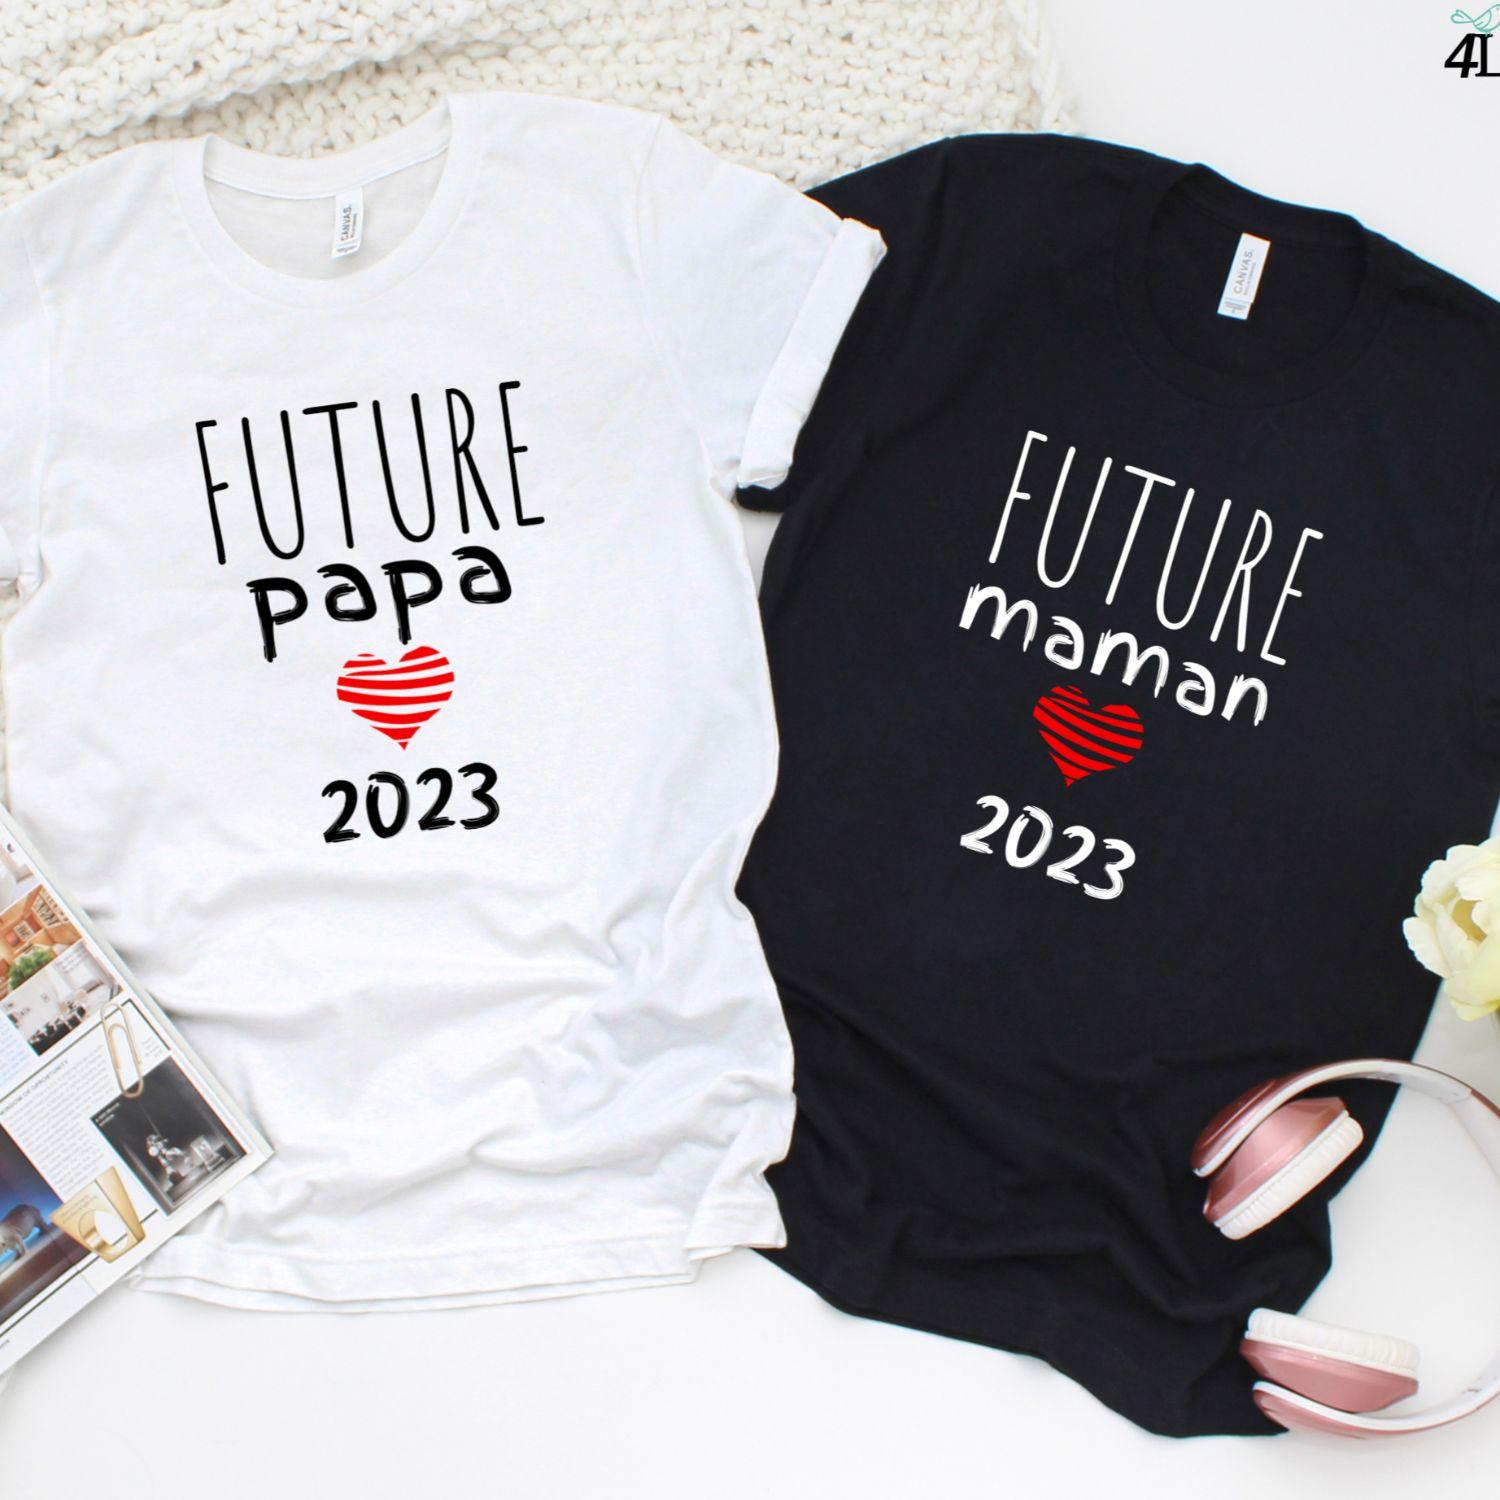 Custom Matching Outfits: Maman Papa Pregnancy Reveal for Aspiring French Families! - 4Lovebirds